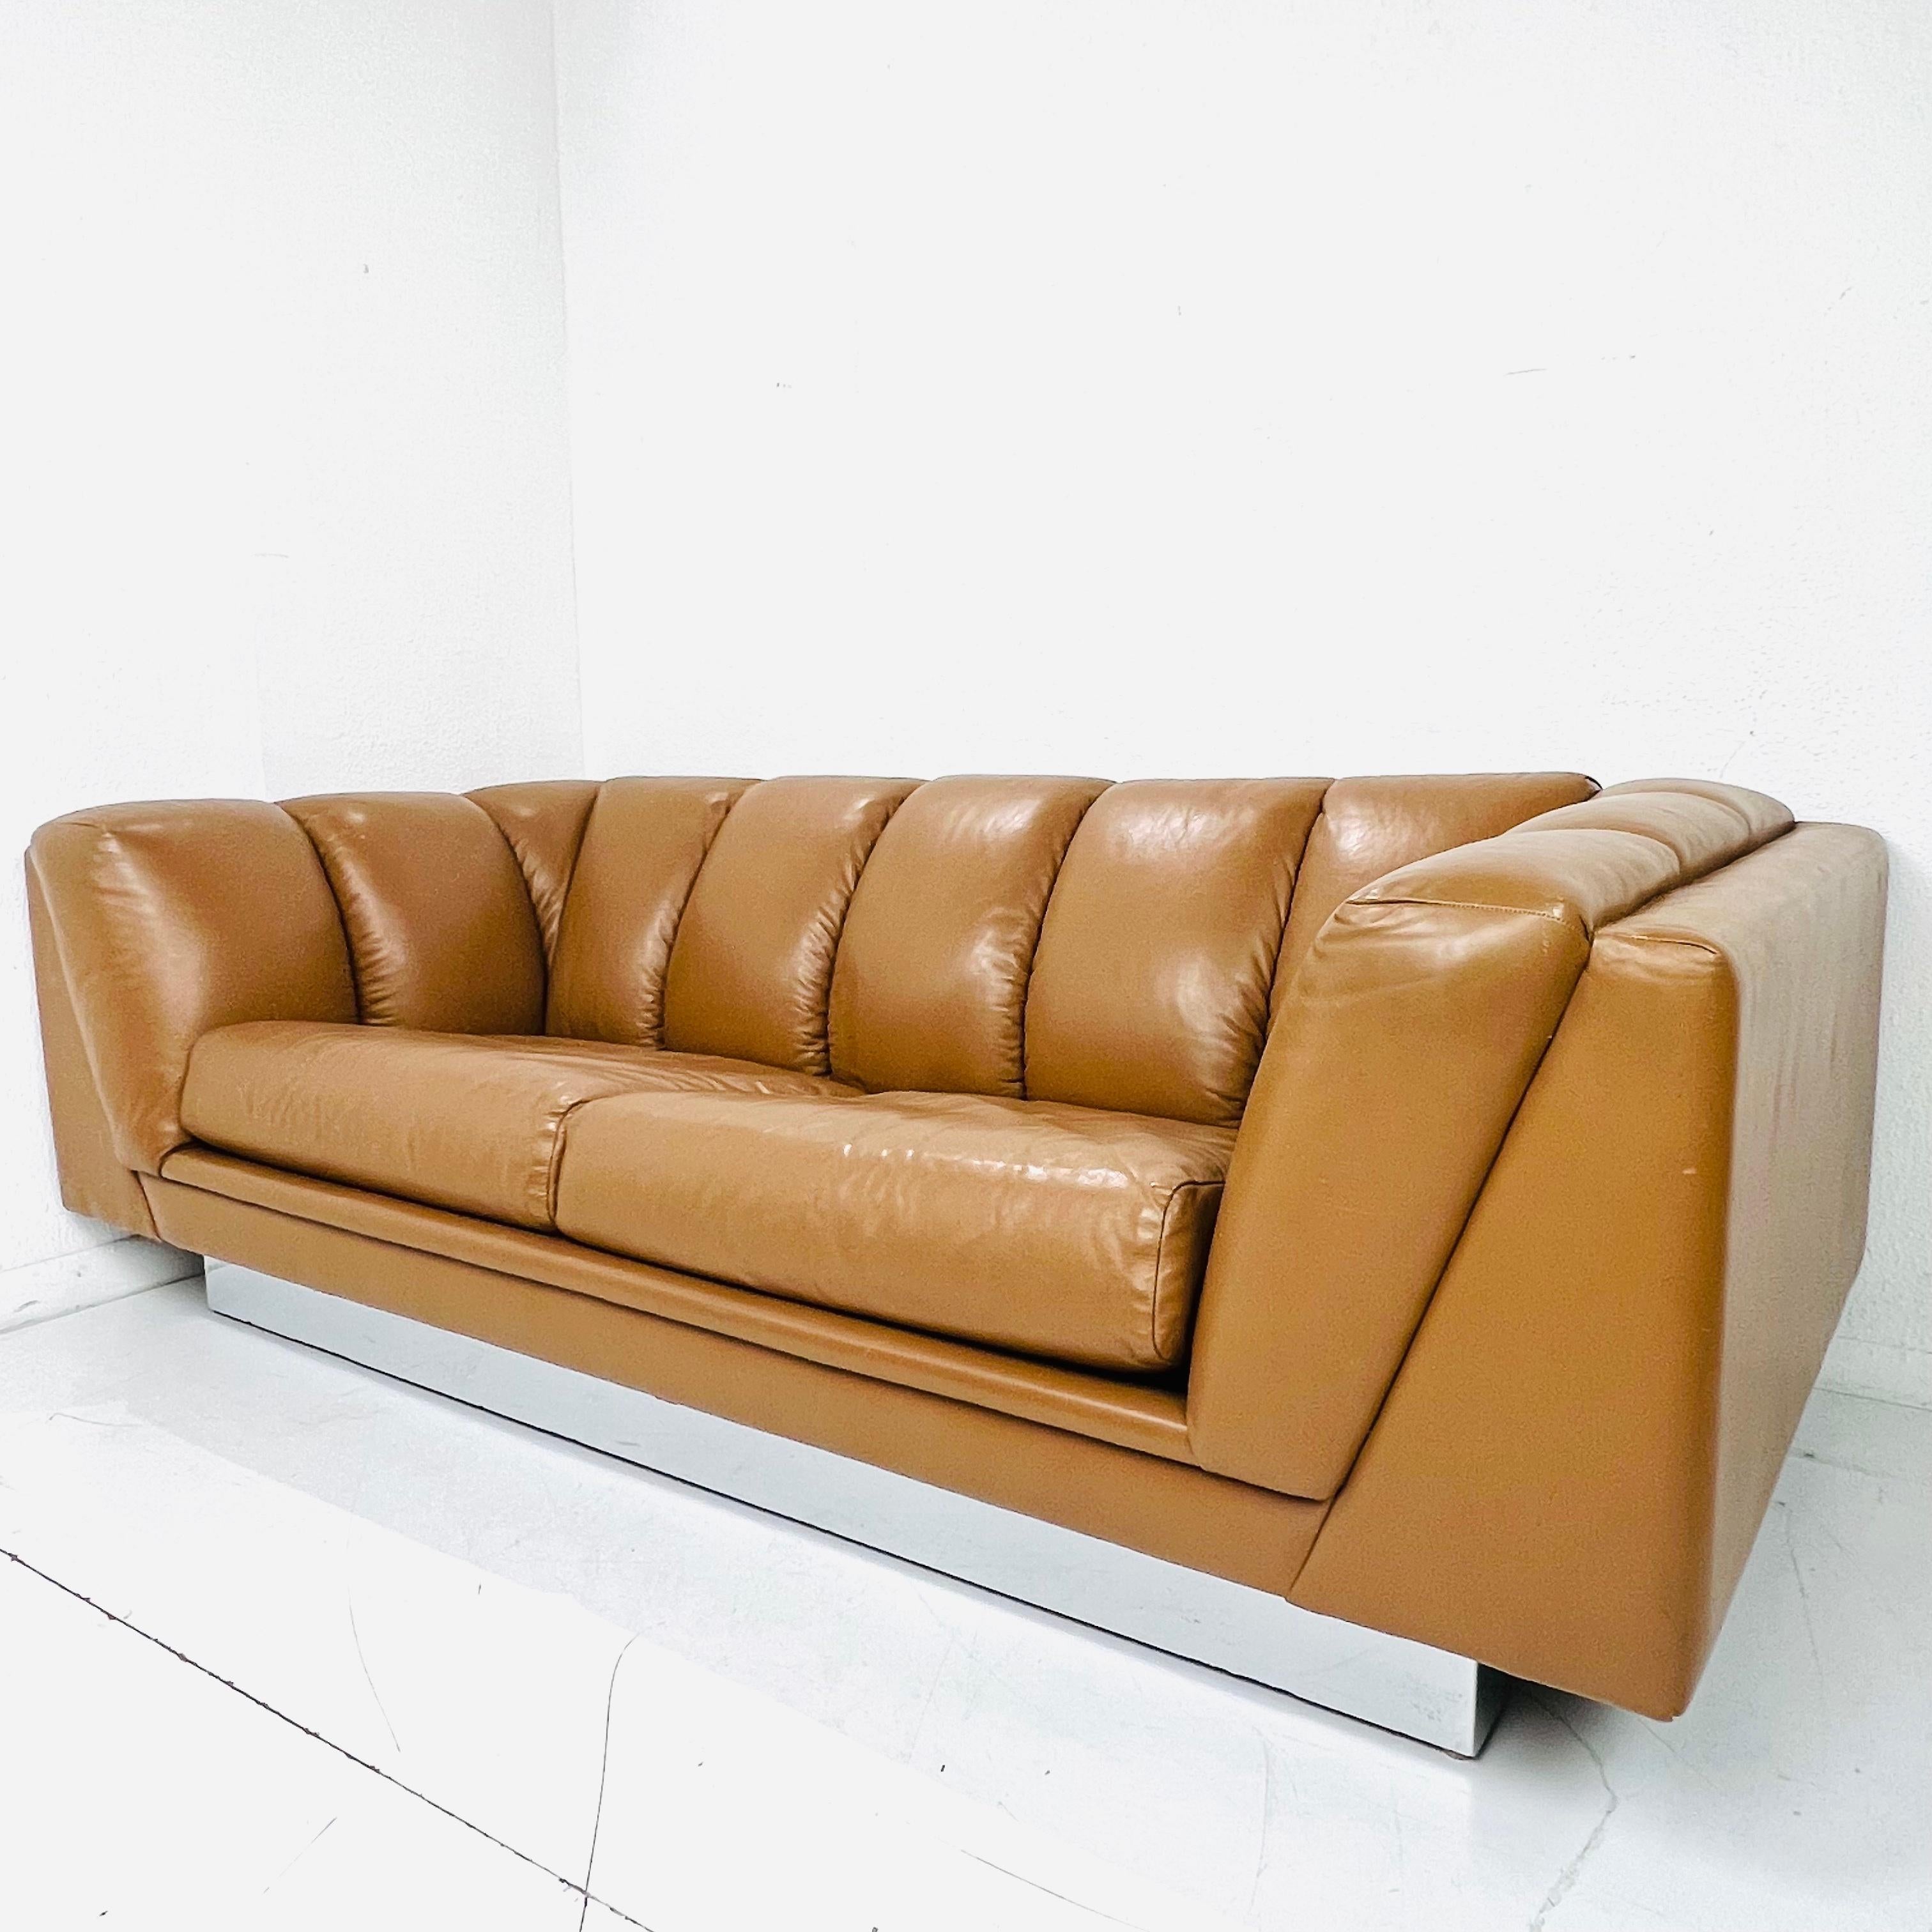 Handsome channeled leather sofa with chrome base by San Francisco, CA-based Metropolitan Furniture, c.1970s. The sofa features a polished mirrored chrome base that gives it a floating effect. The cushions and frame feature the original leather